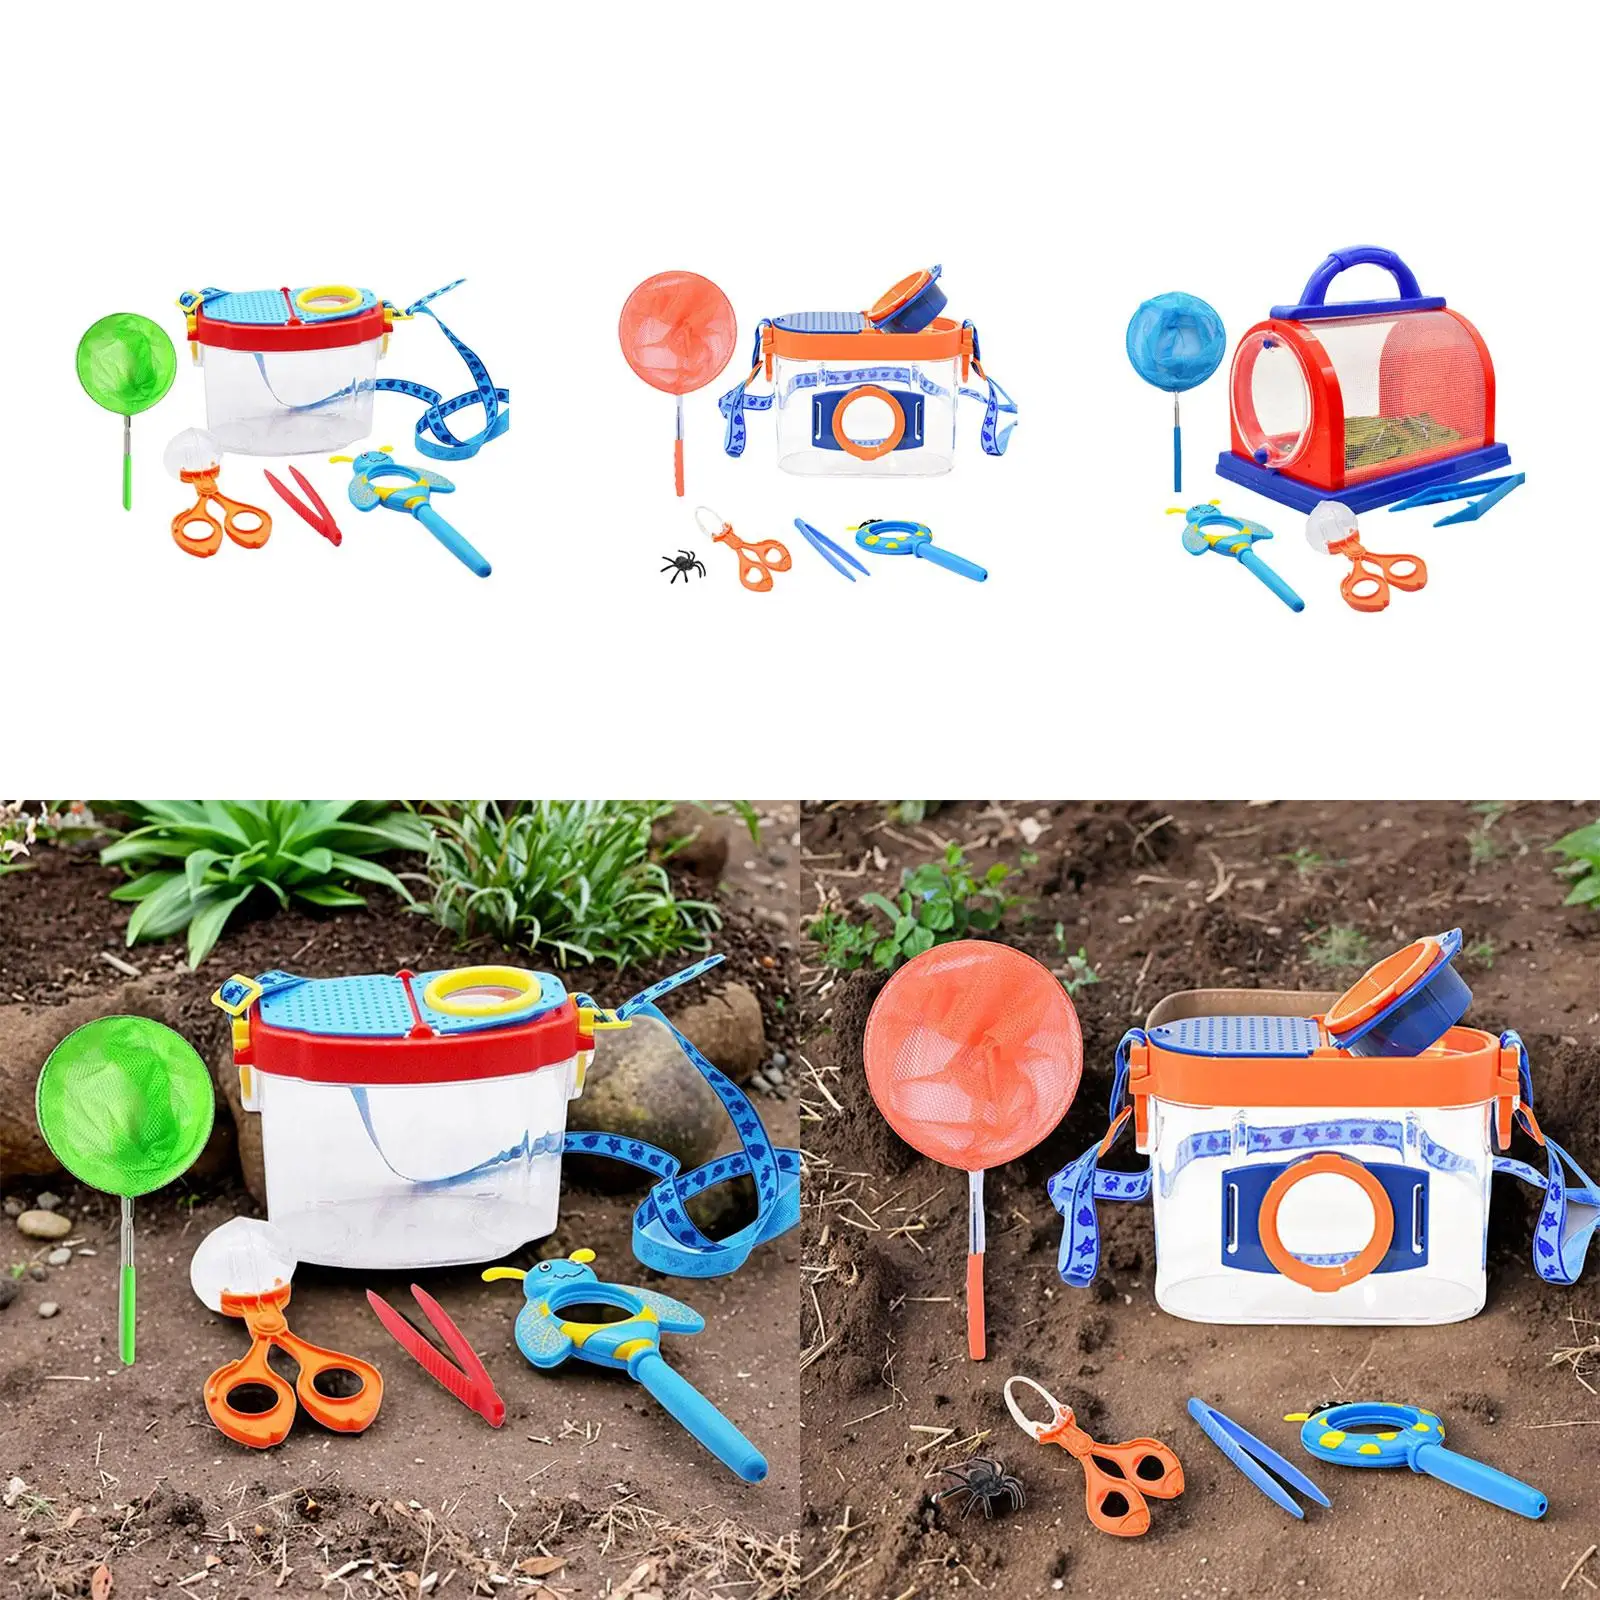 Insect Viewer Box Insect Bug Viewer Collecting Kits for Outdoor Childs Toy